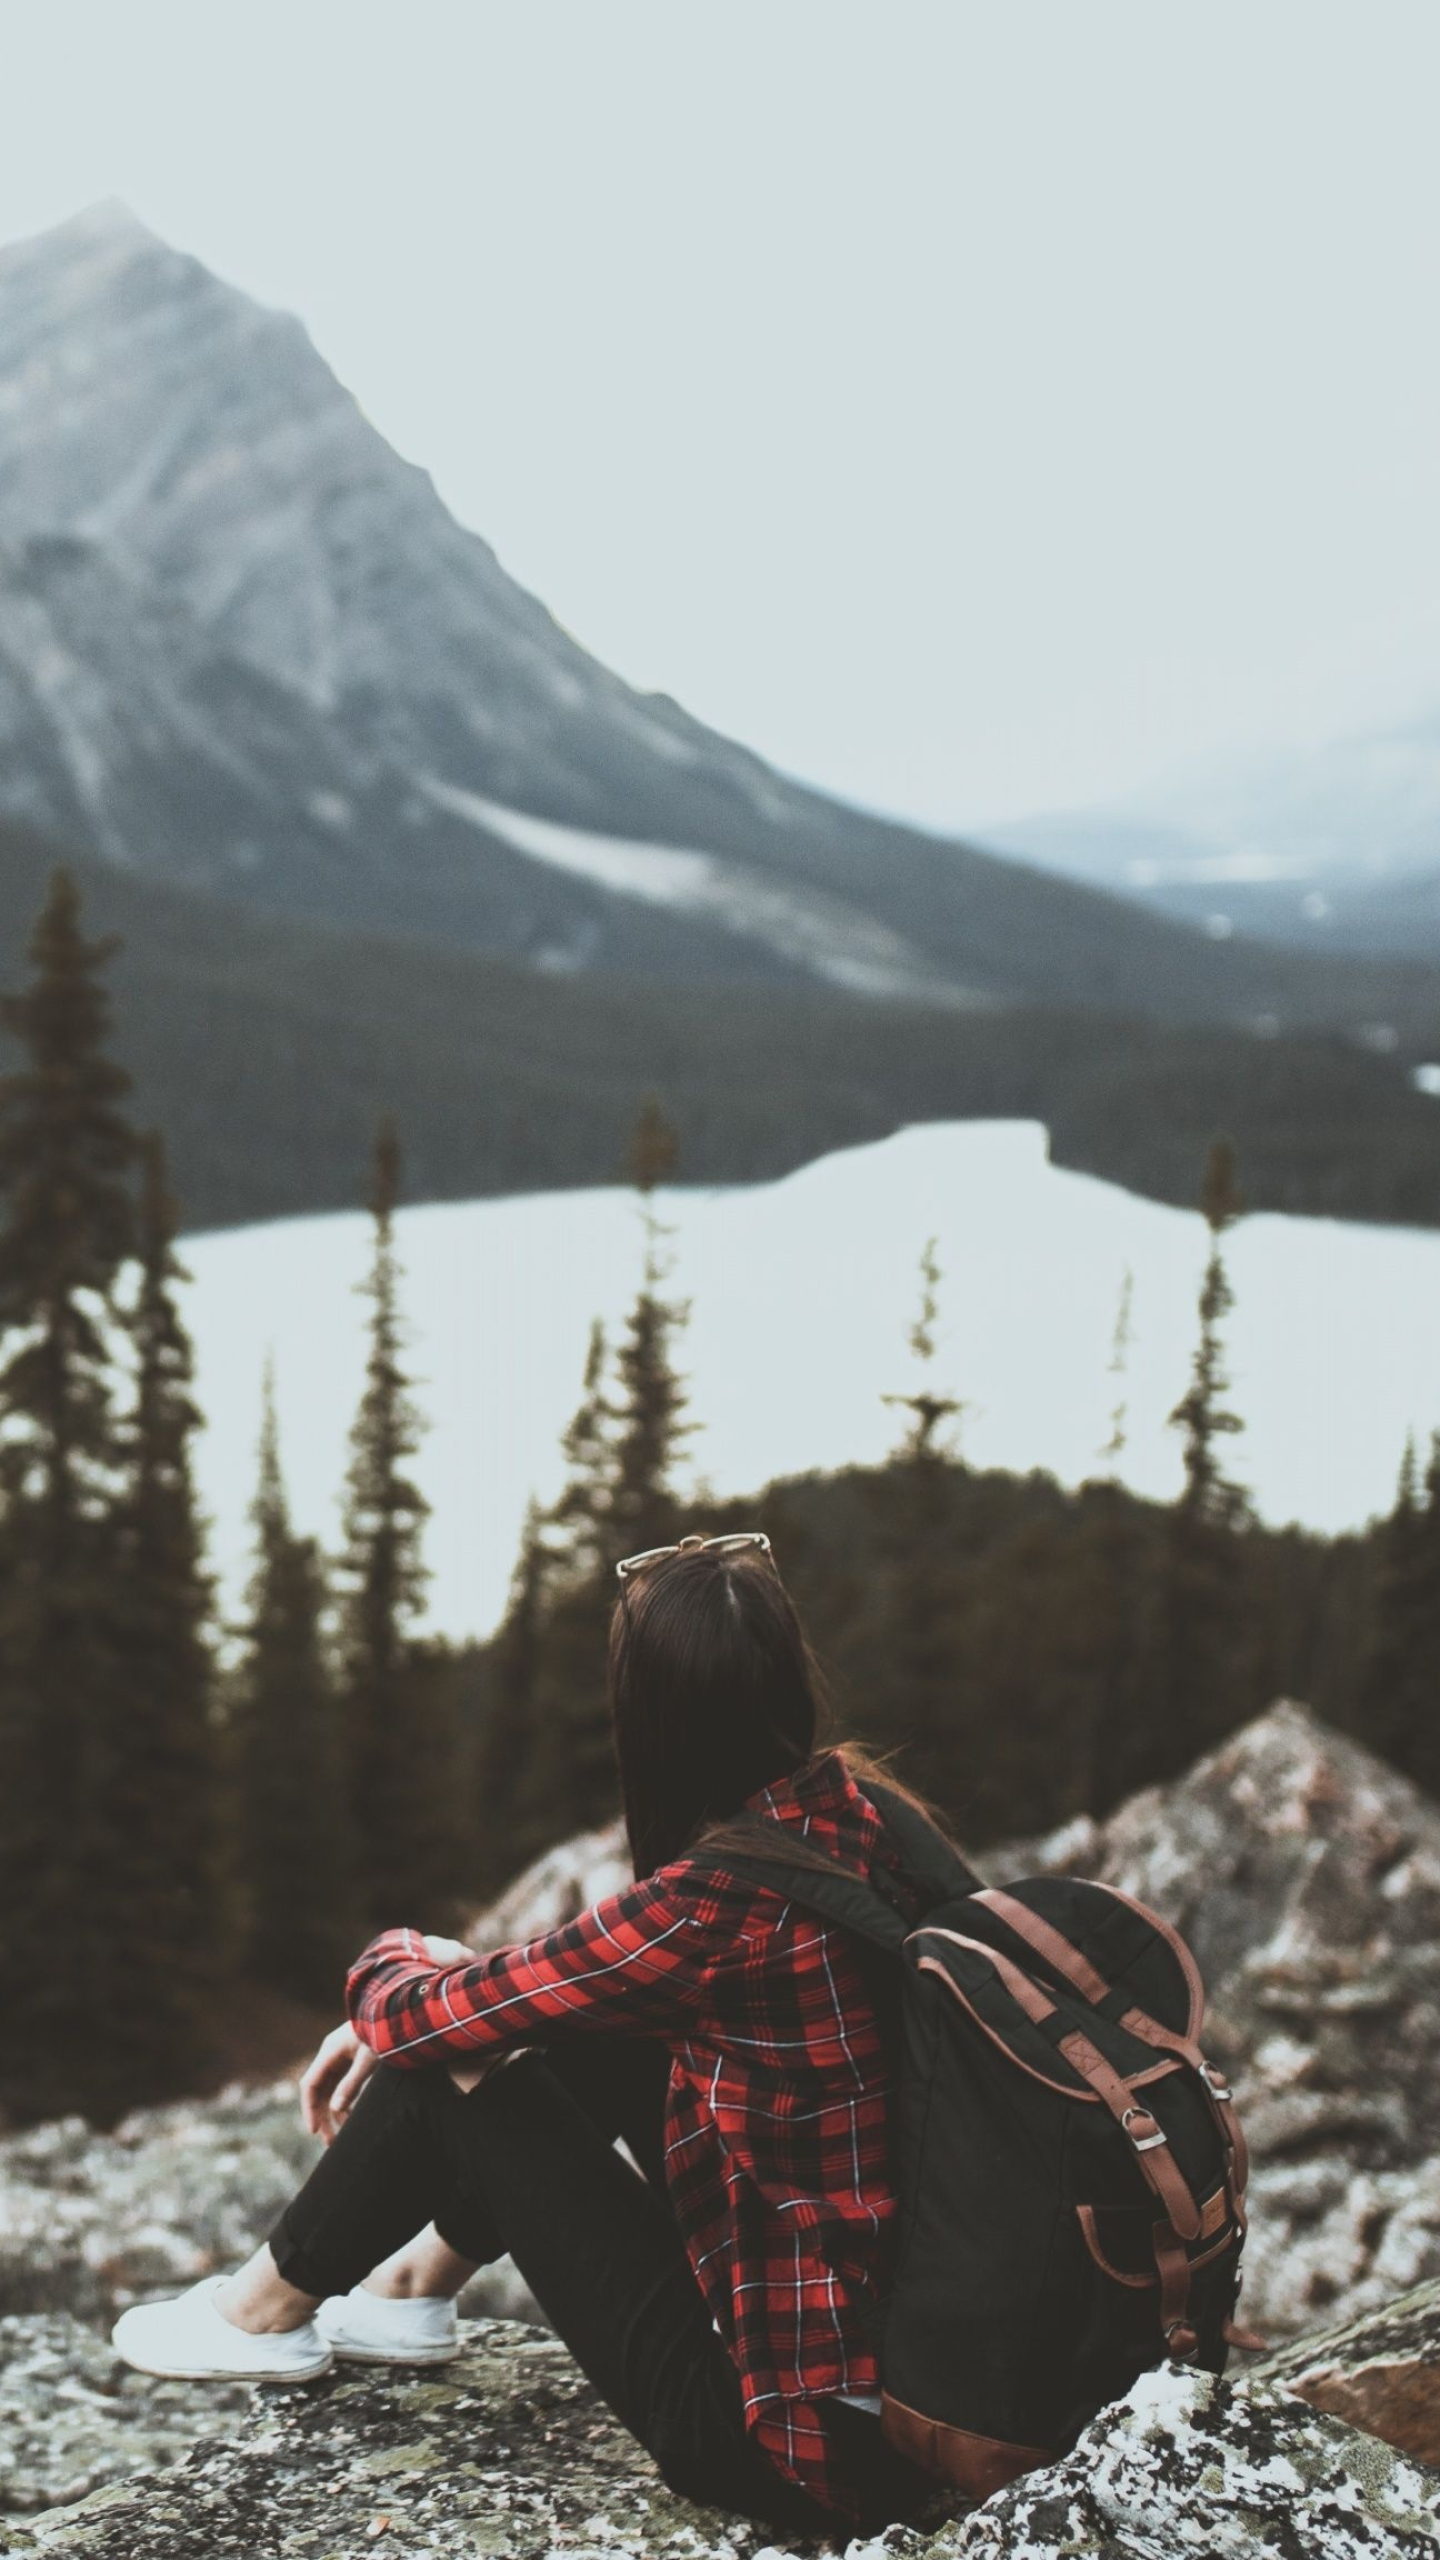 Backpacking: A long journey deep into the mountains, Having a rest near the lake. 1440x2560 HD Wallpaper.